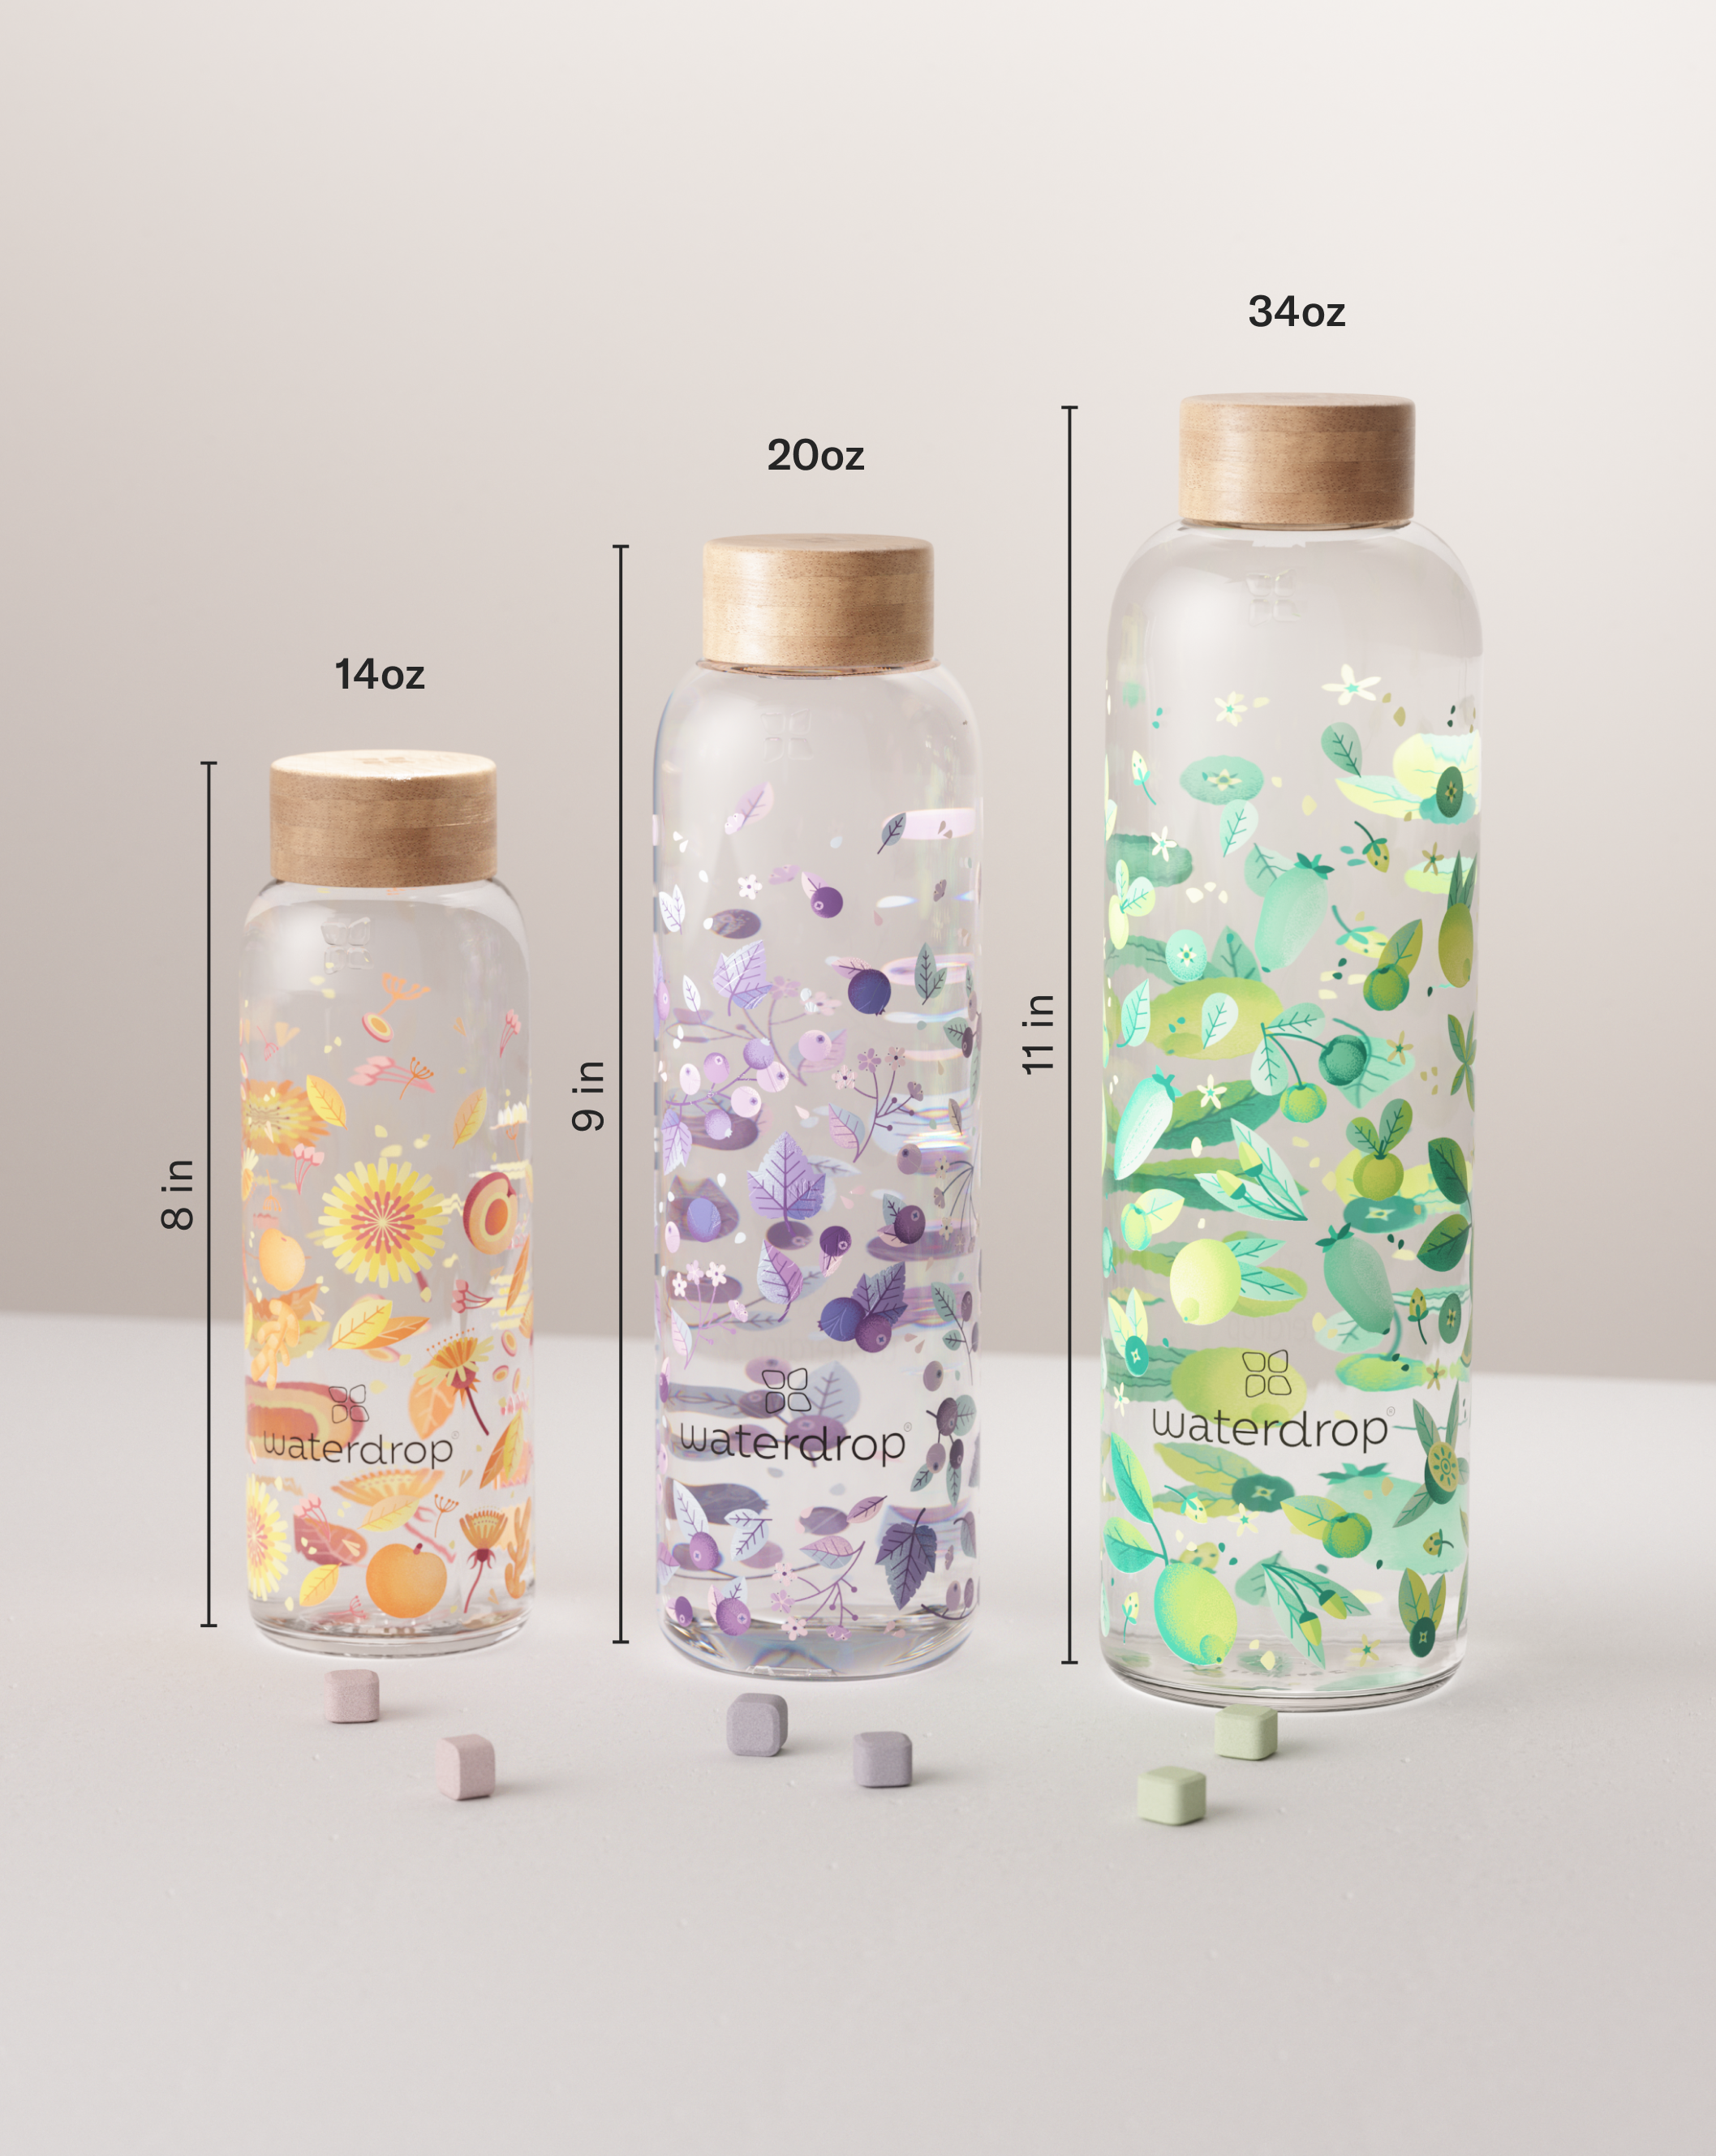 Starter Set Microdrink Glass 18 Microdrink hydration cubes with vitamins ·  without sugar · 20 oz or 34 oz Borosilicate Glass Bottle